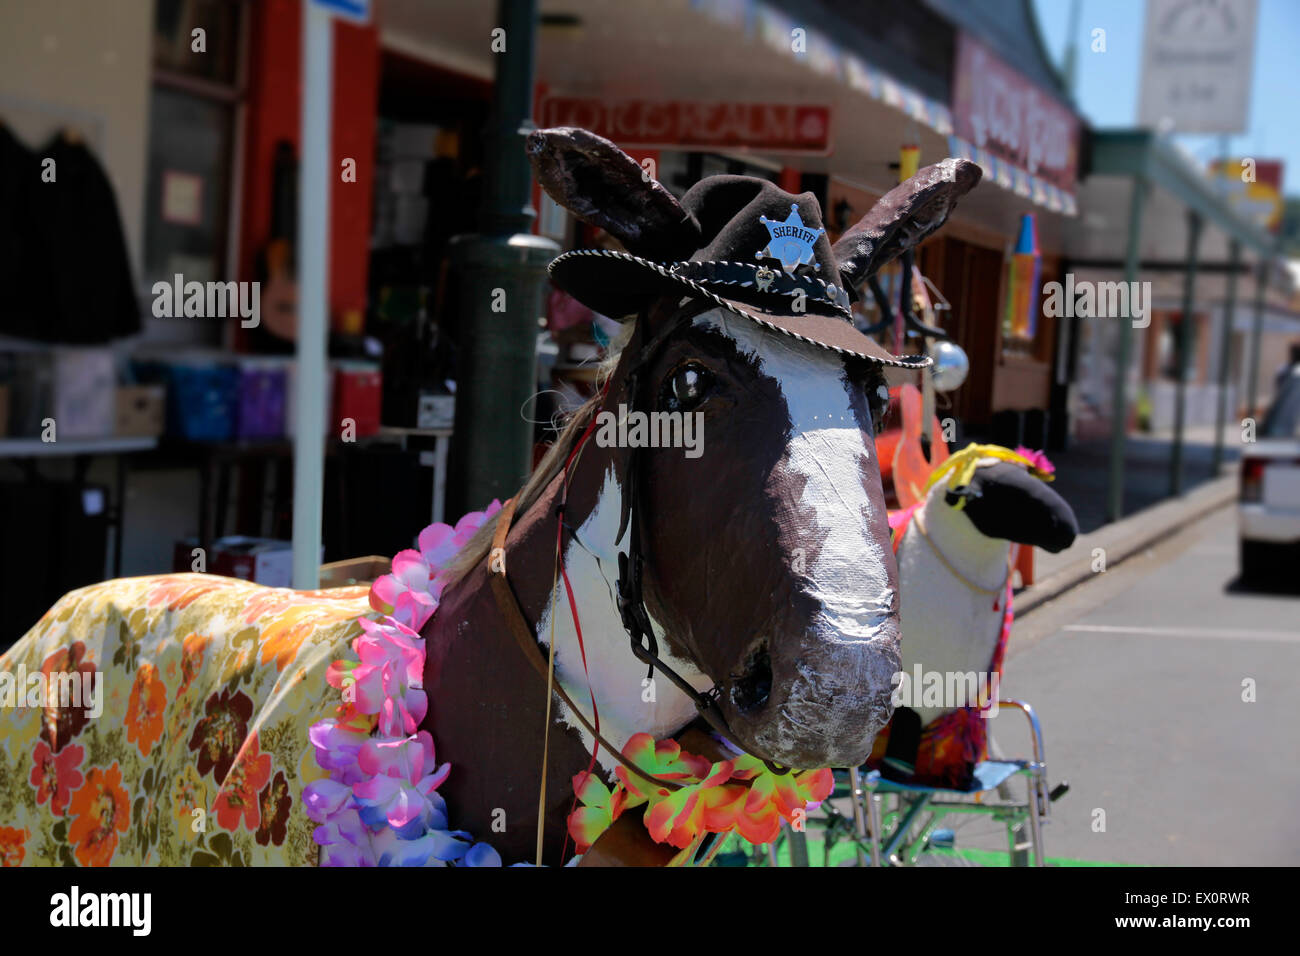 Funny horse made of paper mache in front of second hand shop Stock Photo